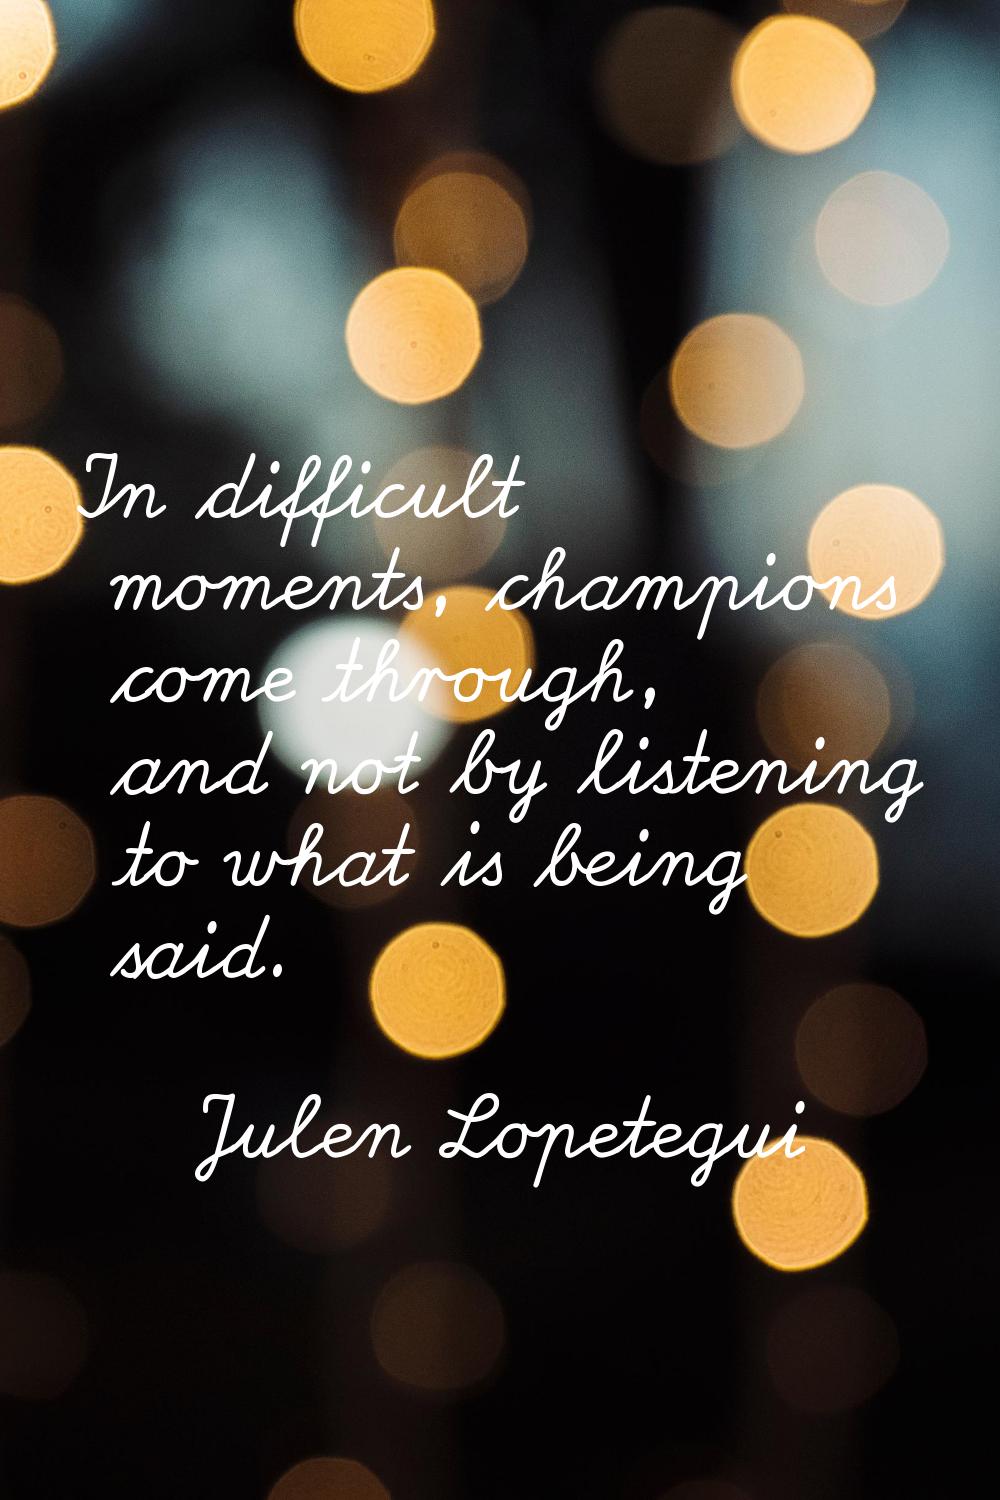 In difficult moments, champions come through, and not by listening to what is being said.